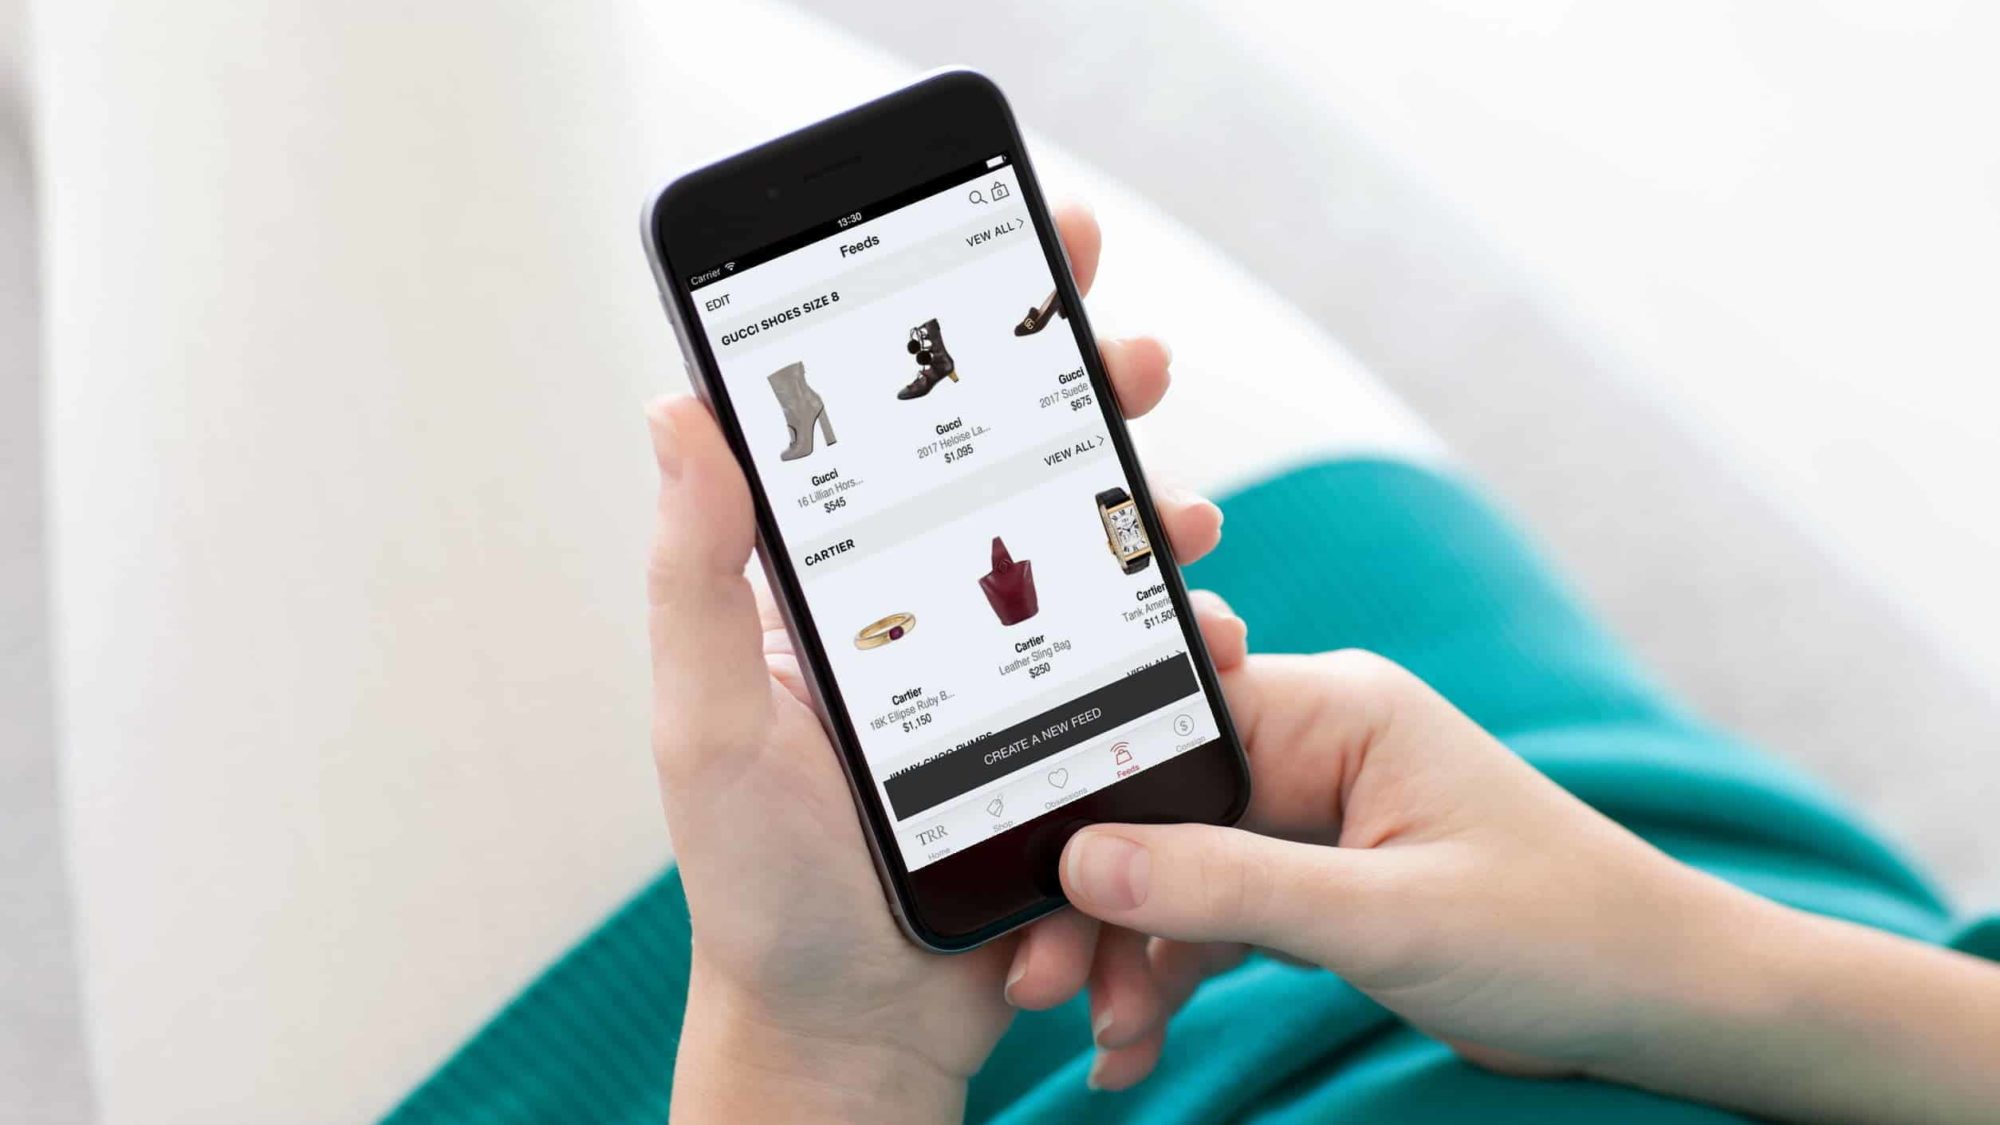 Figures released reveal online shopping growth